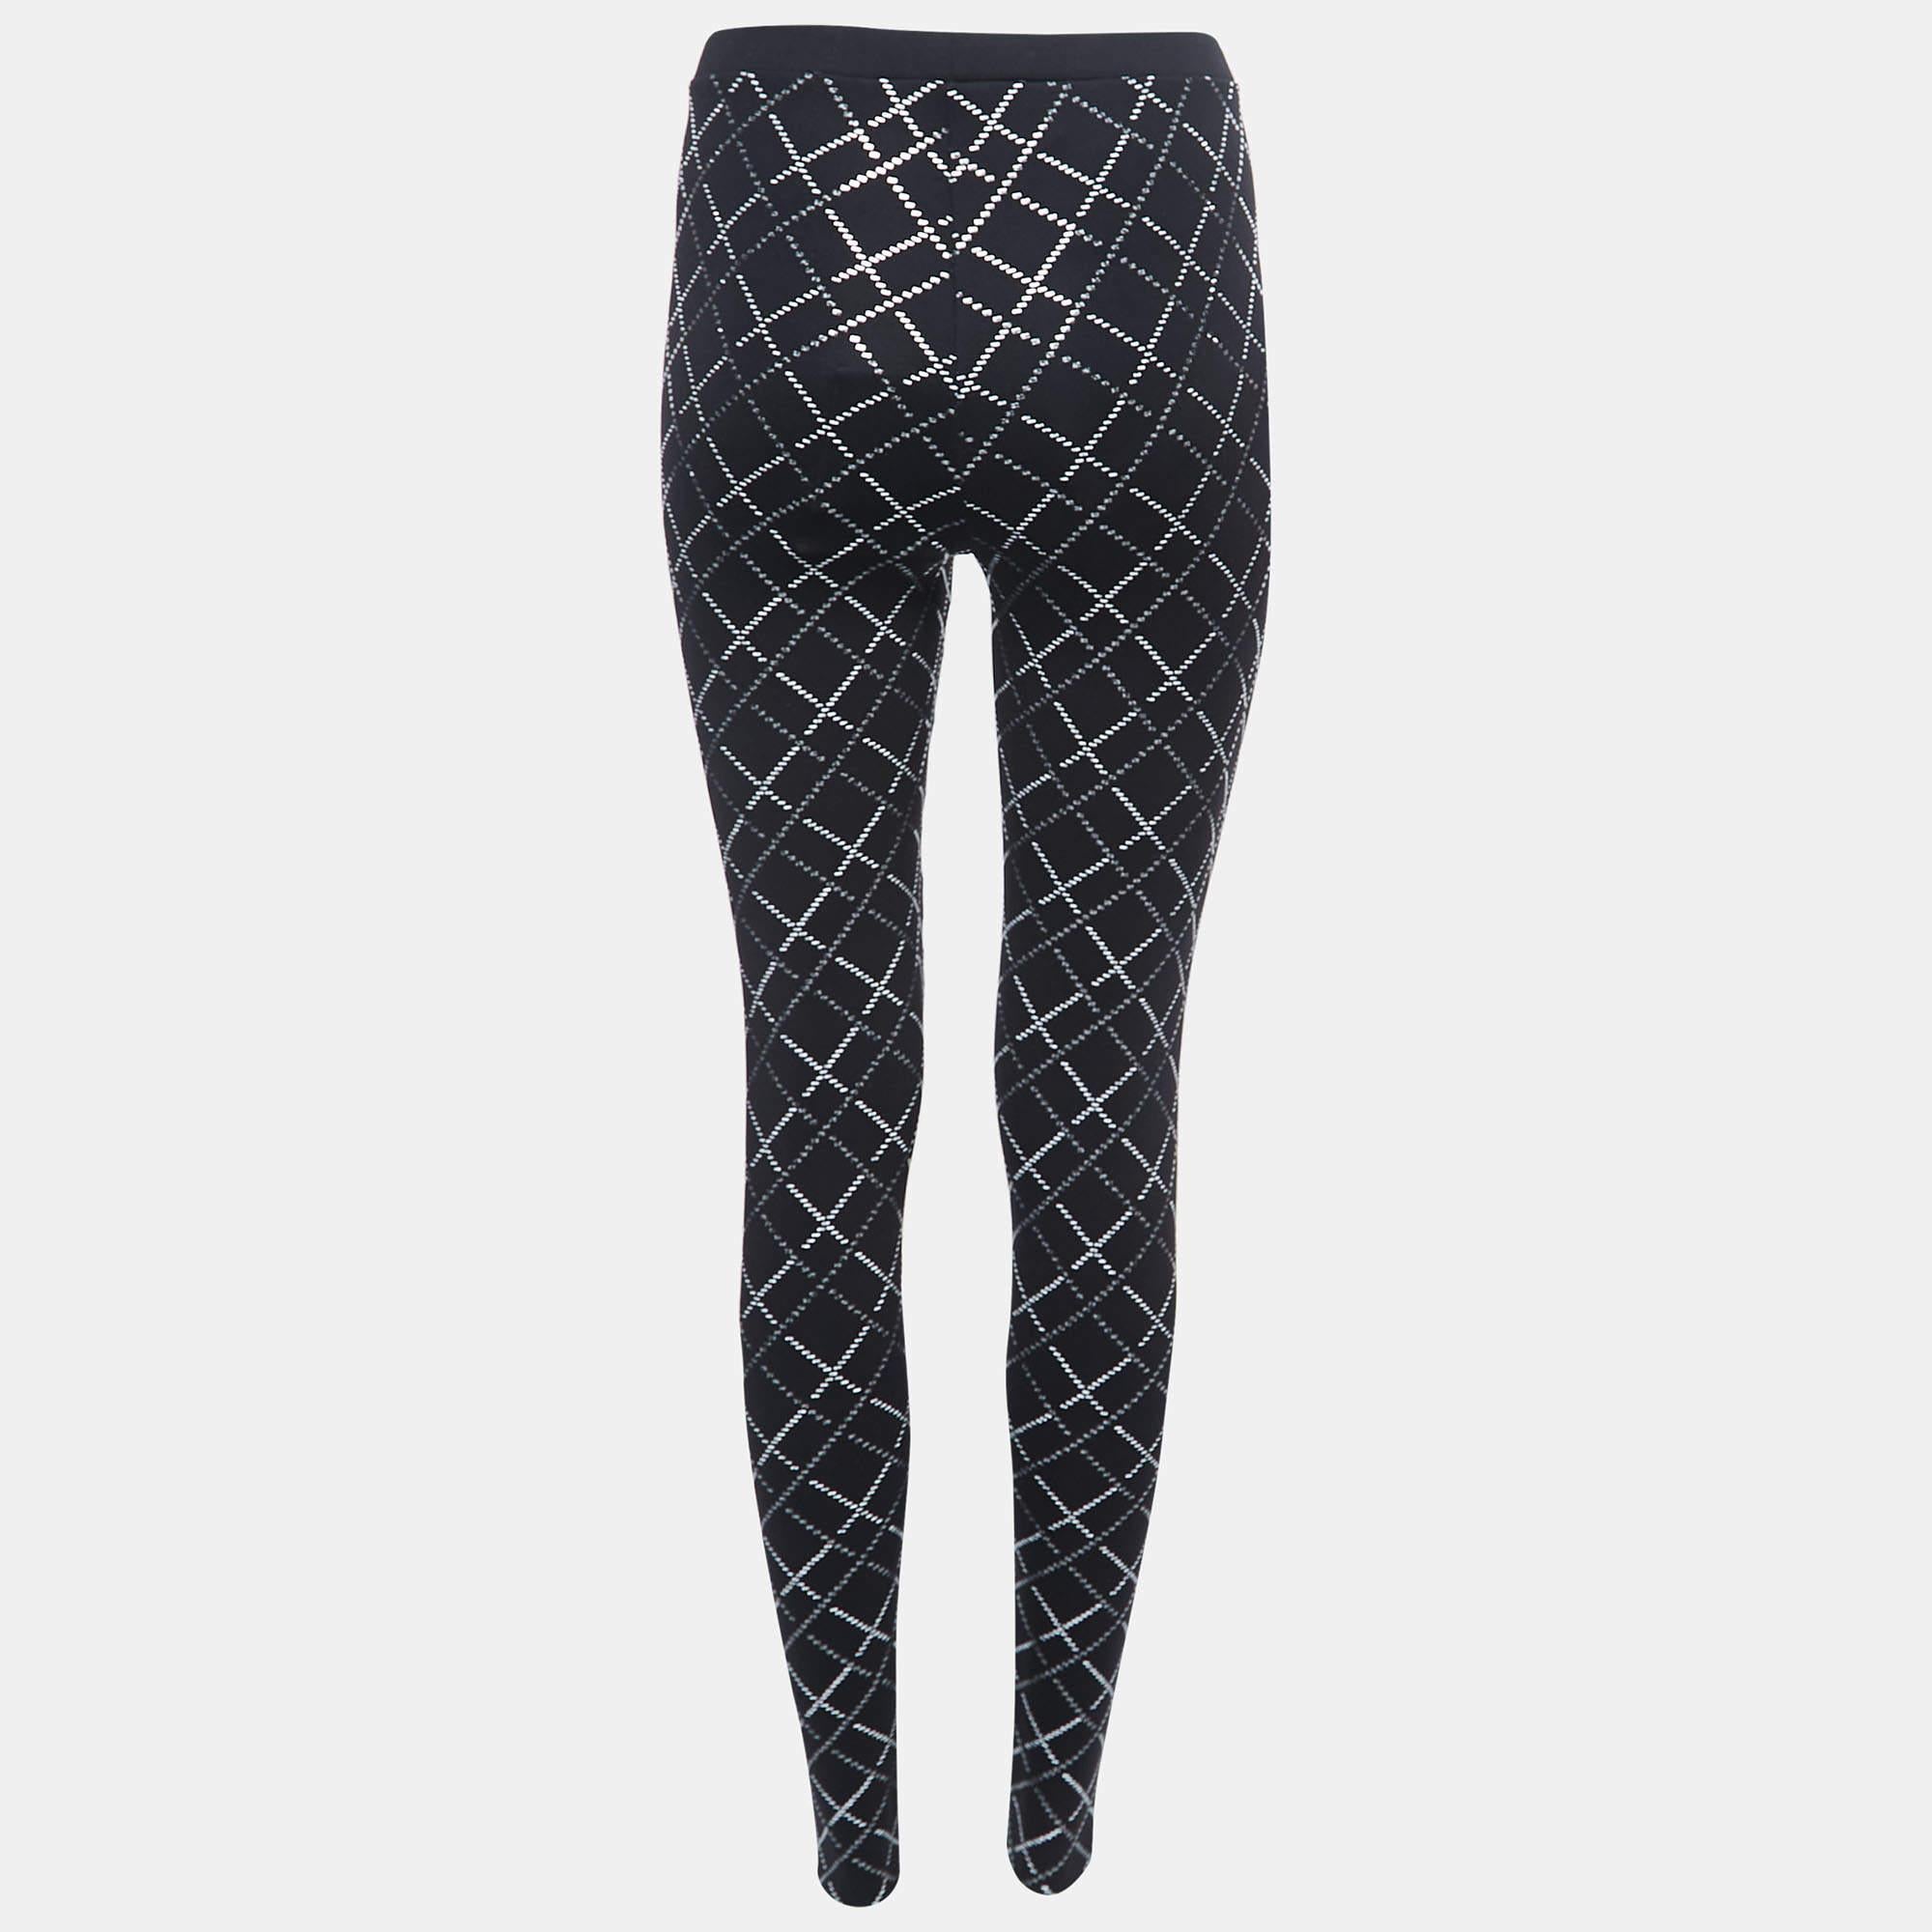 For your workout sessions, lounging around, or just running errands, these leggings will come in handy multiple times. They are made from quality materials and have a good fit.

Includes: Tag, Original Dustbag